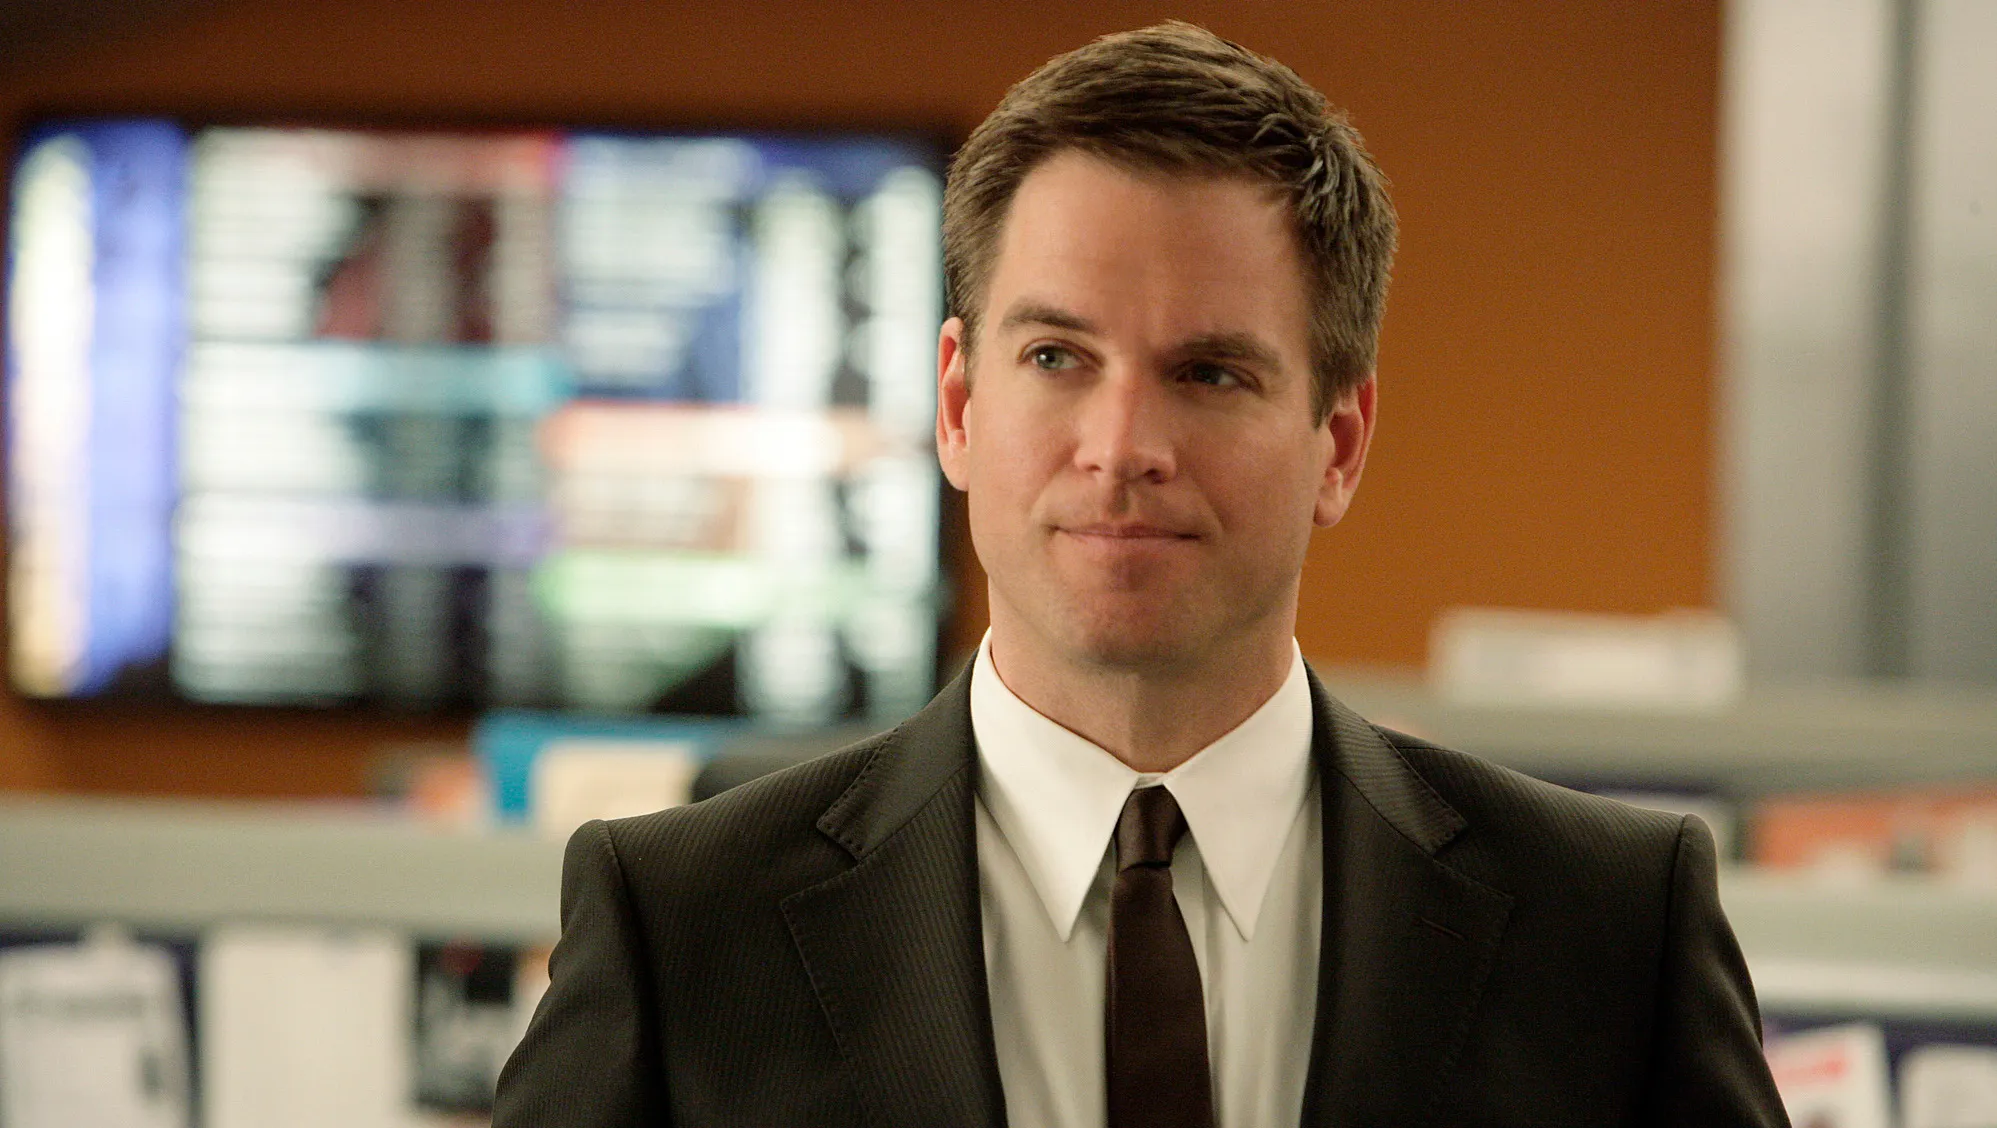 Michael Weatherly Teases Fans with a Potential Return to NCIS What's Next for Tony DiNozzo